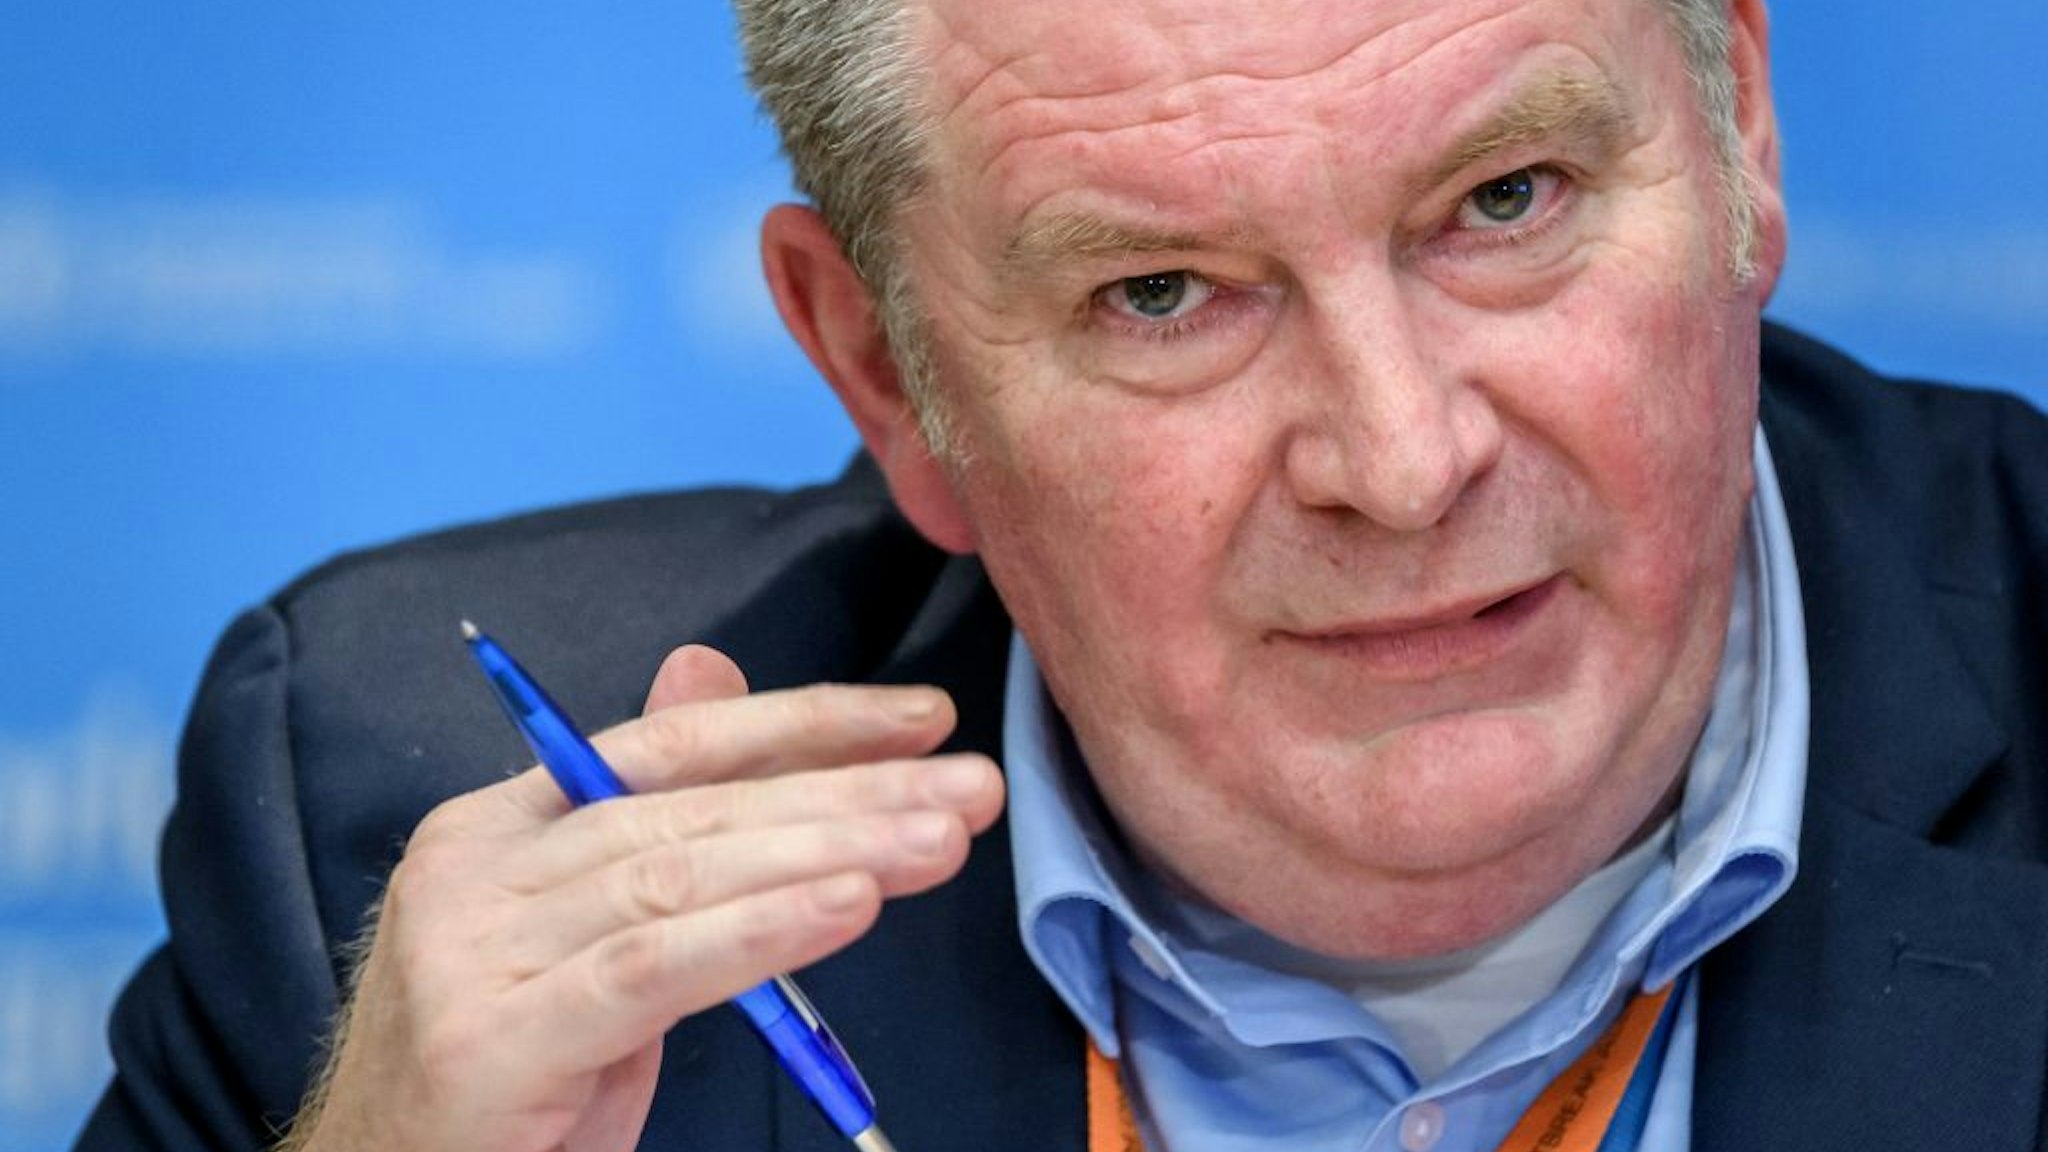 Graphic content / World Health Organization (WHO) Health Emergencies Programme Director Michael Ryan talks during a daily press briefing on COVID-19 virus at the WHO headquarters on March 11, 2020 in Geneva